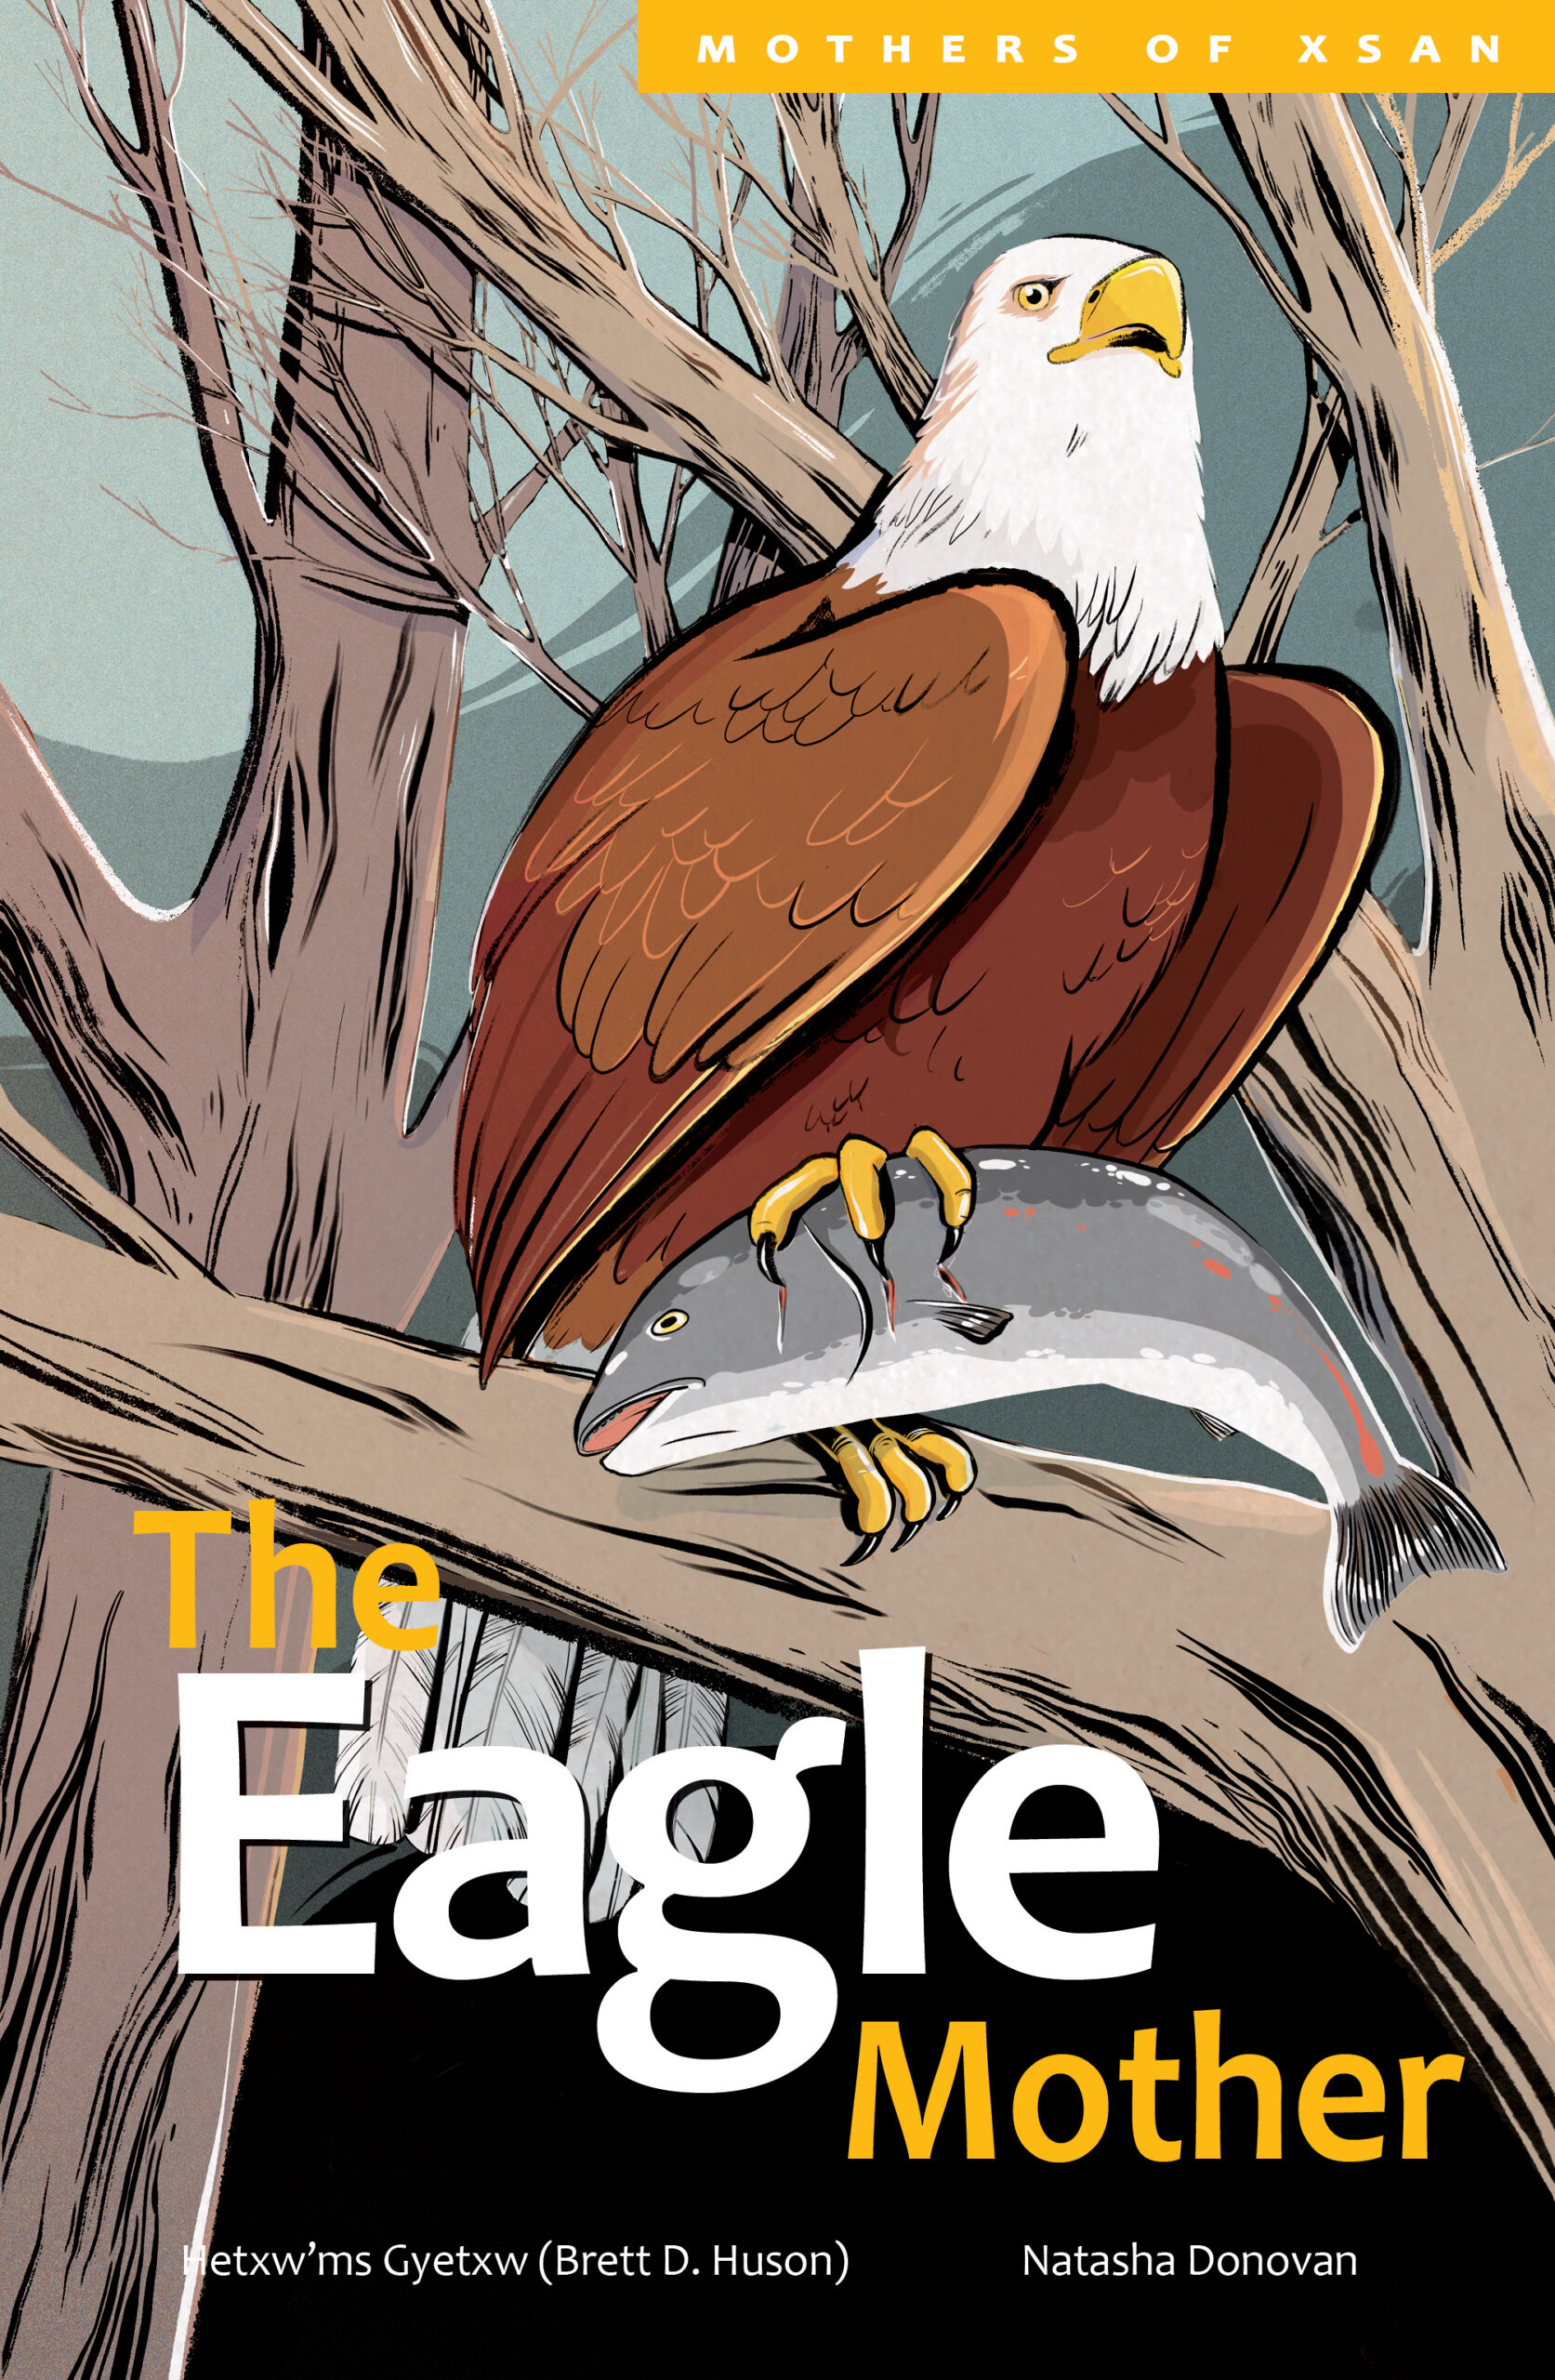 The Eagle Mother book cover